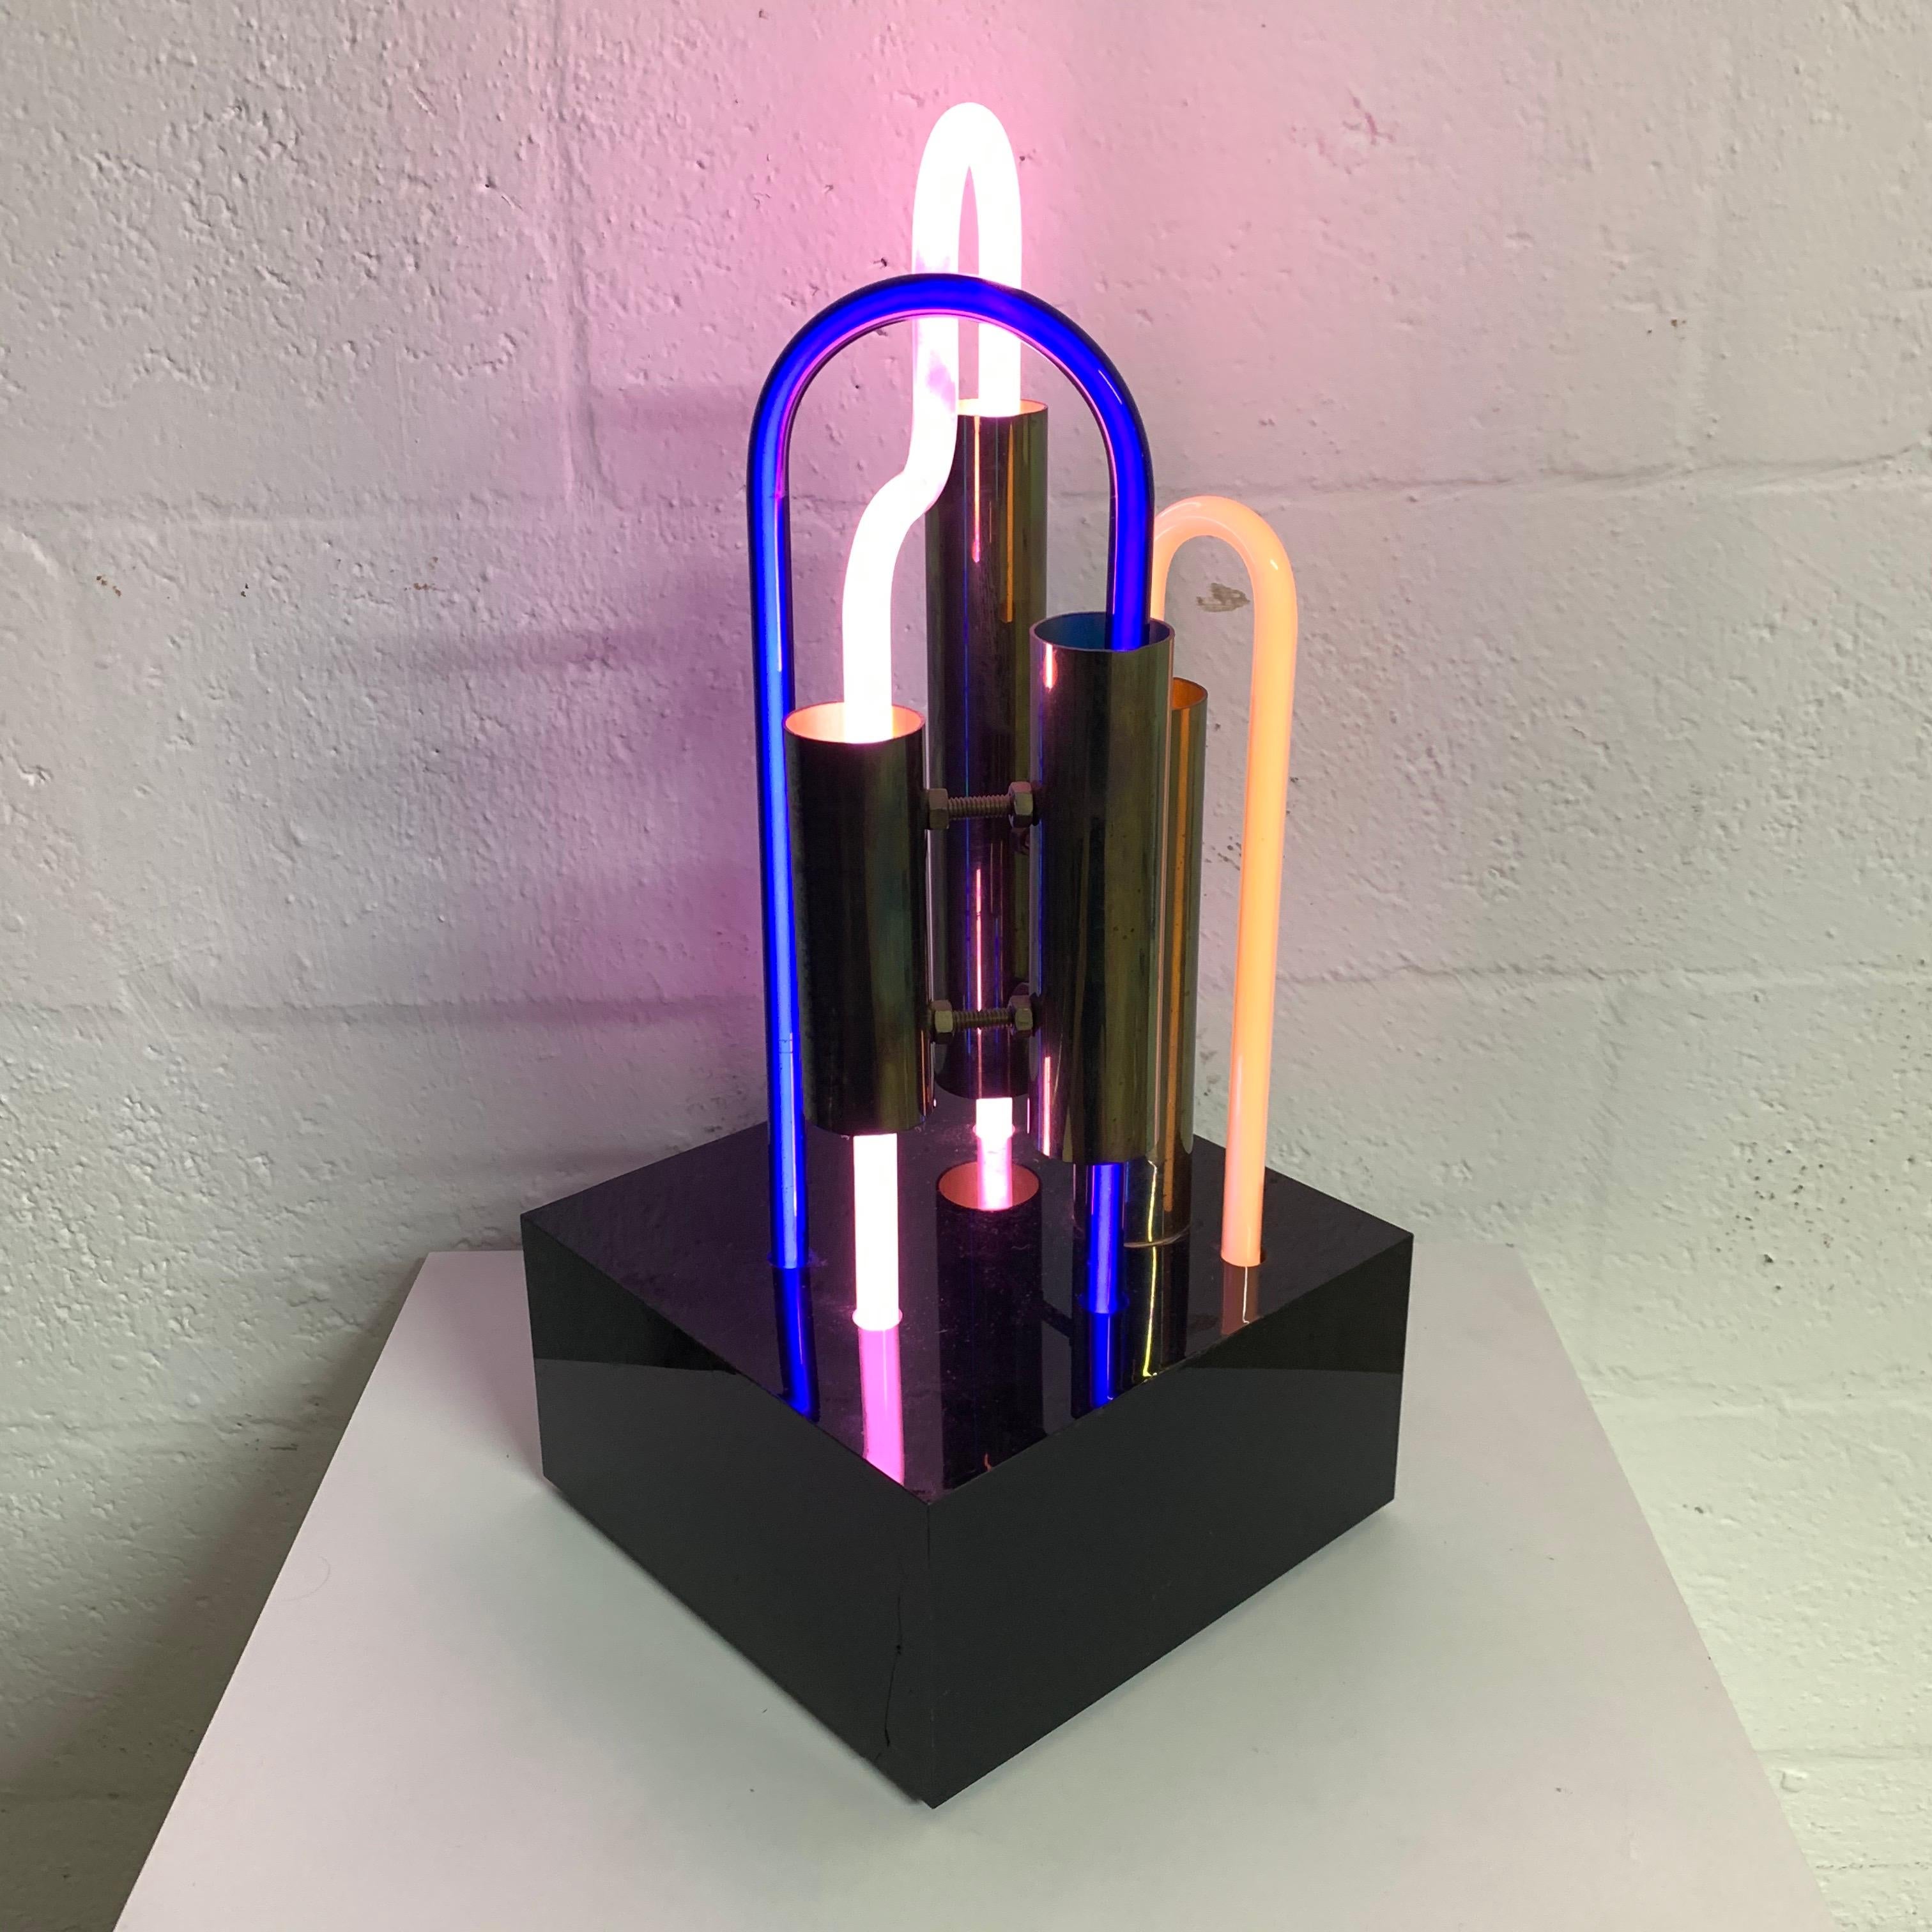 American VCK, ALS #3 Neon Brass and Lucite Sculpture Lamp, Signed, 1985